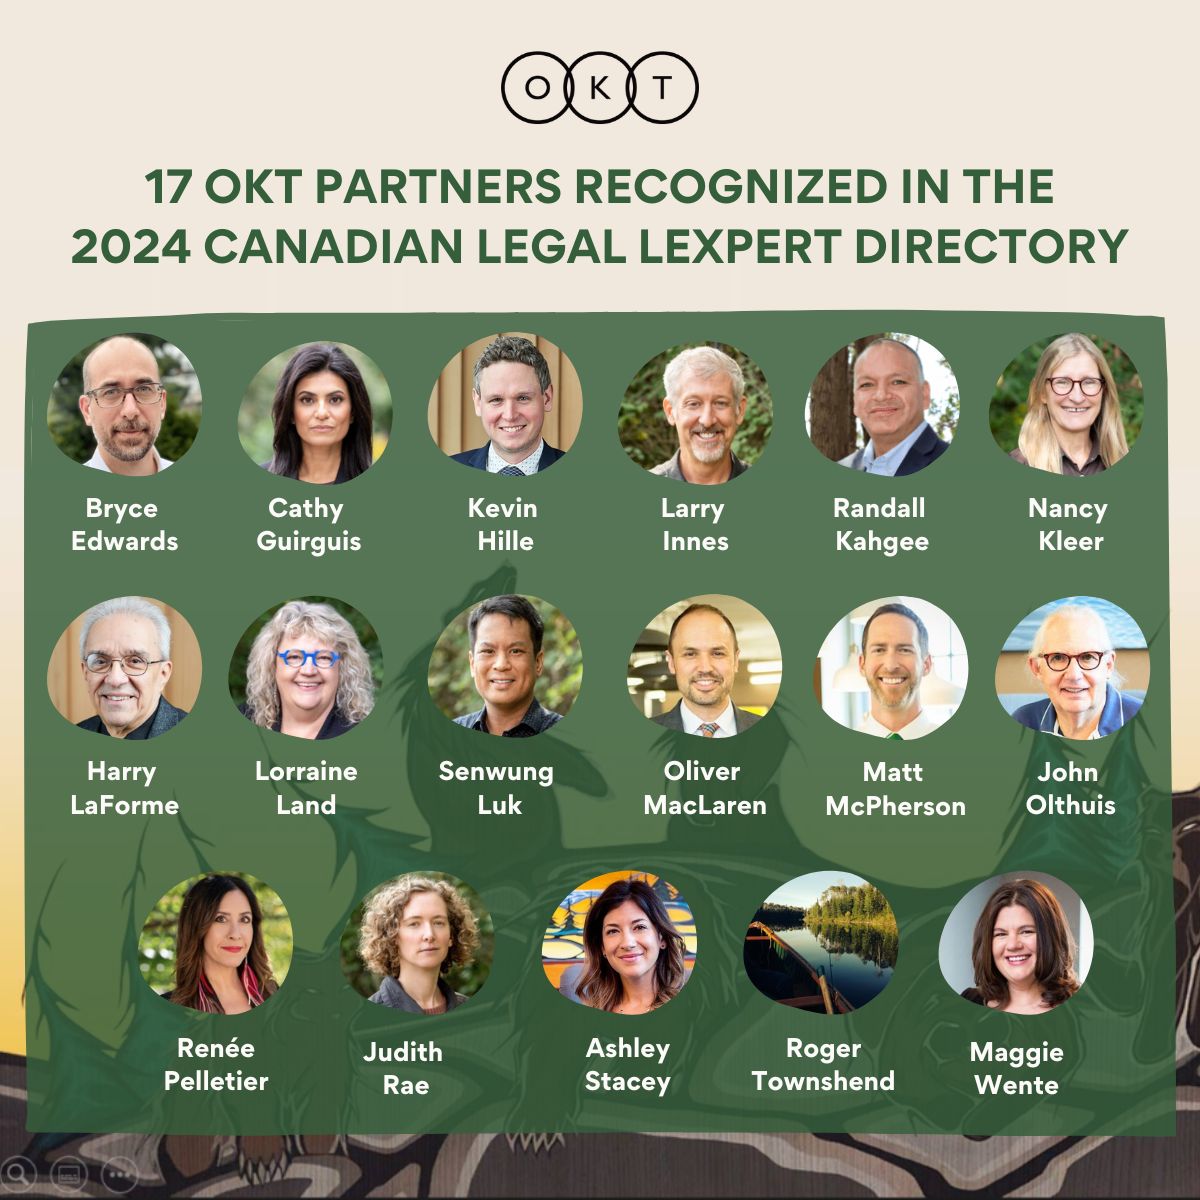 OKT is proud to announce that we have been ranked as “Most Frequently Recommended” in the area of Aboriginal Law by Lexpert, and thrilled to share that 17 of our lawyers have been ranked in the 2024 Canadian Legal Lexpert Directory, as experts in their field.